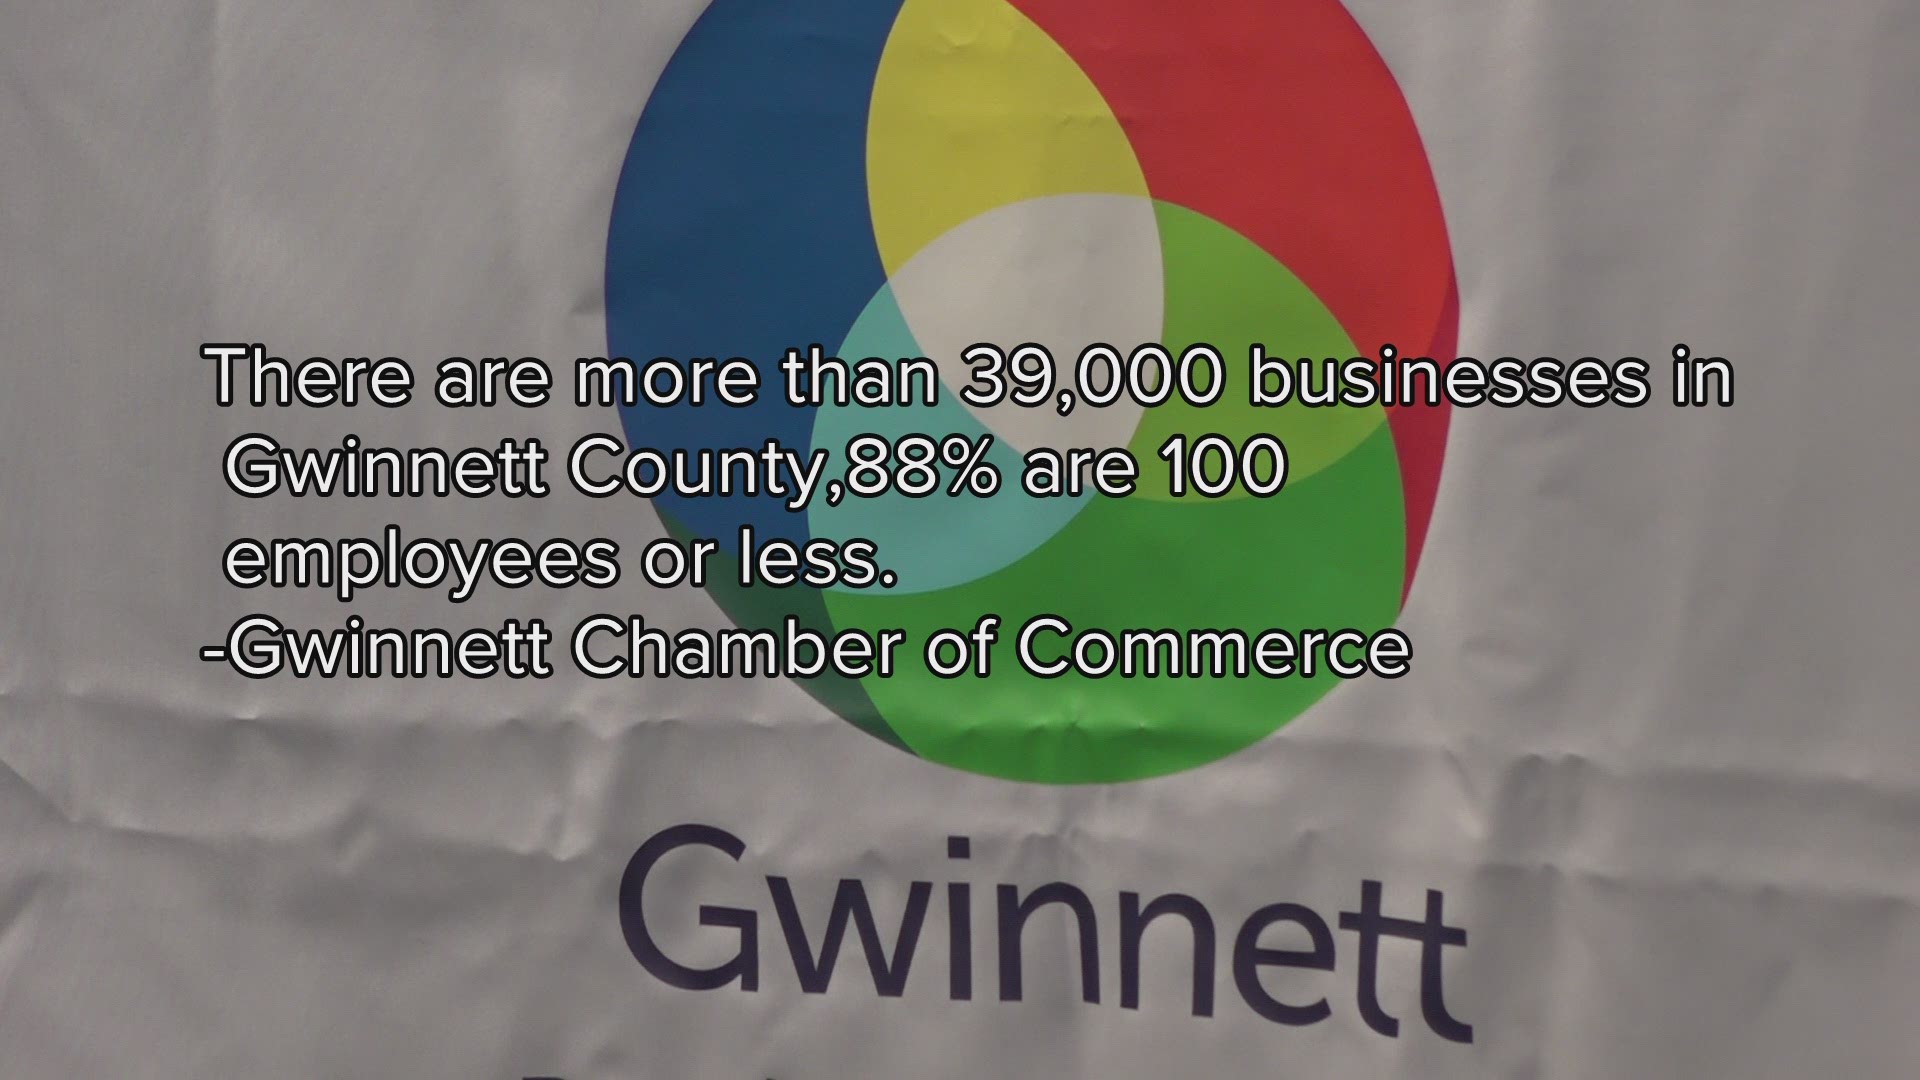 We spoke with small business owners about operating in Gwinnett County.